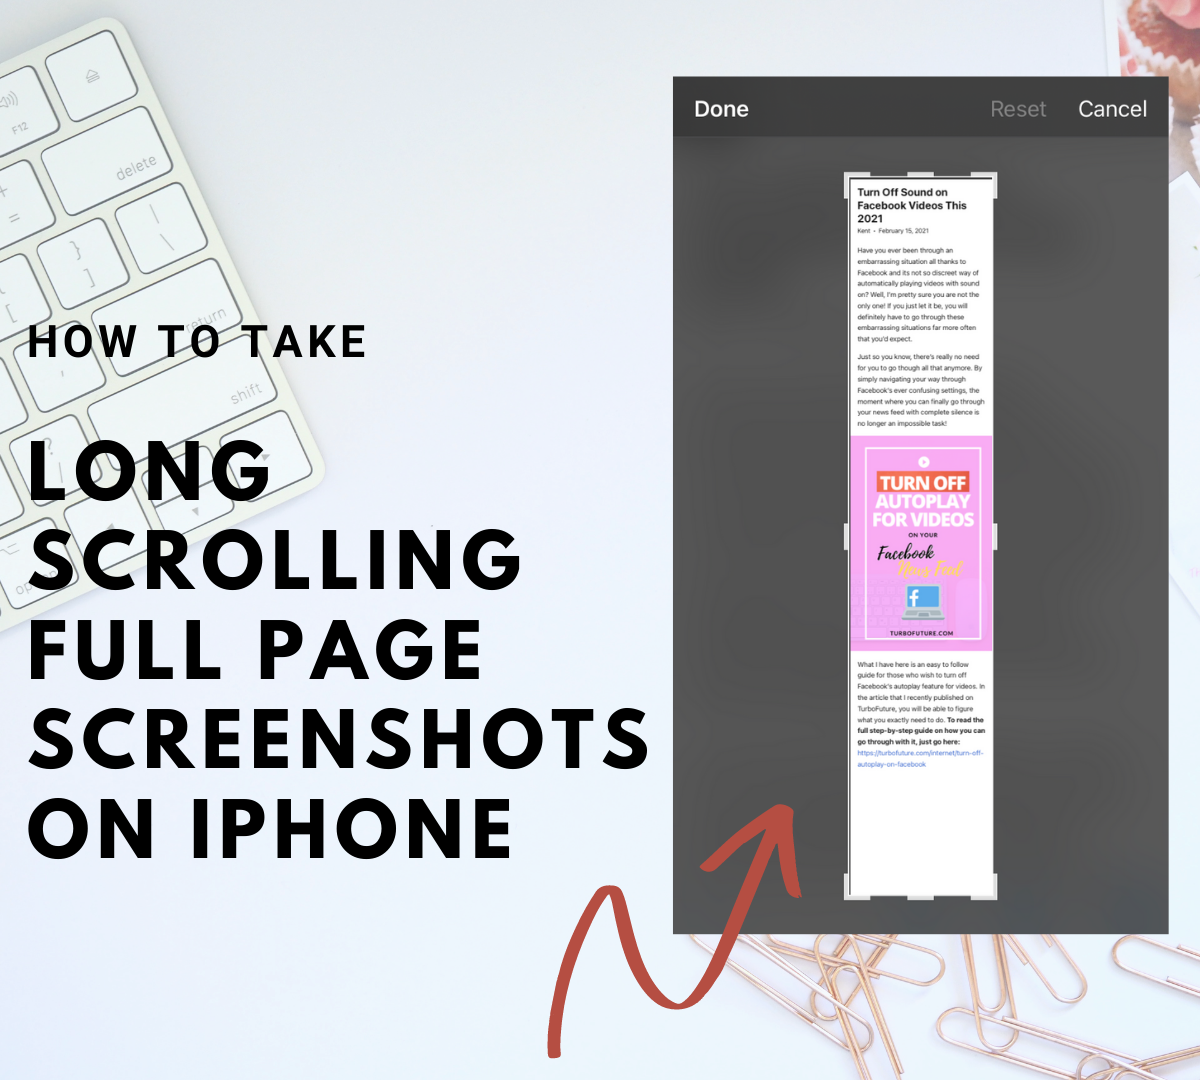 How to Take a Screenshot on iPhone (Full Page Screen Capture)